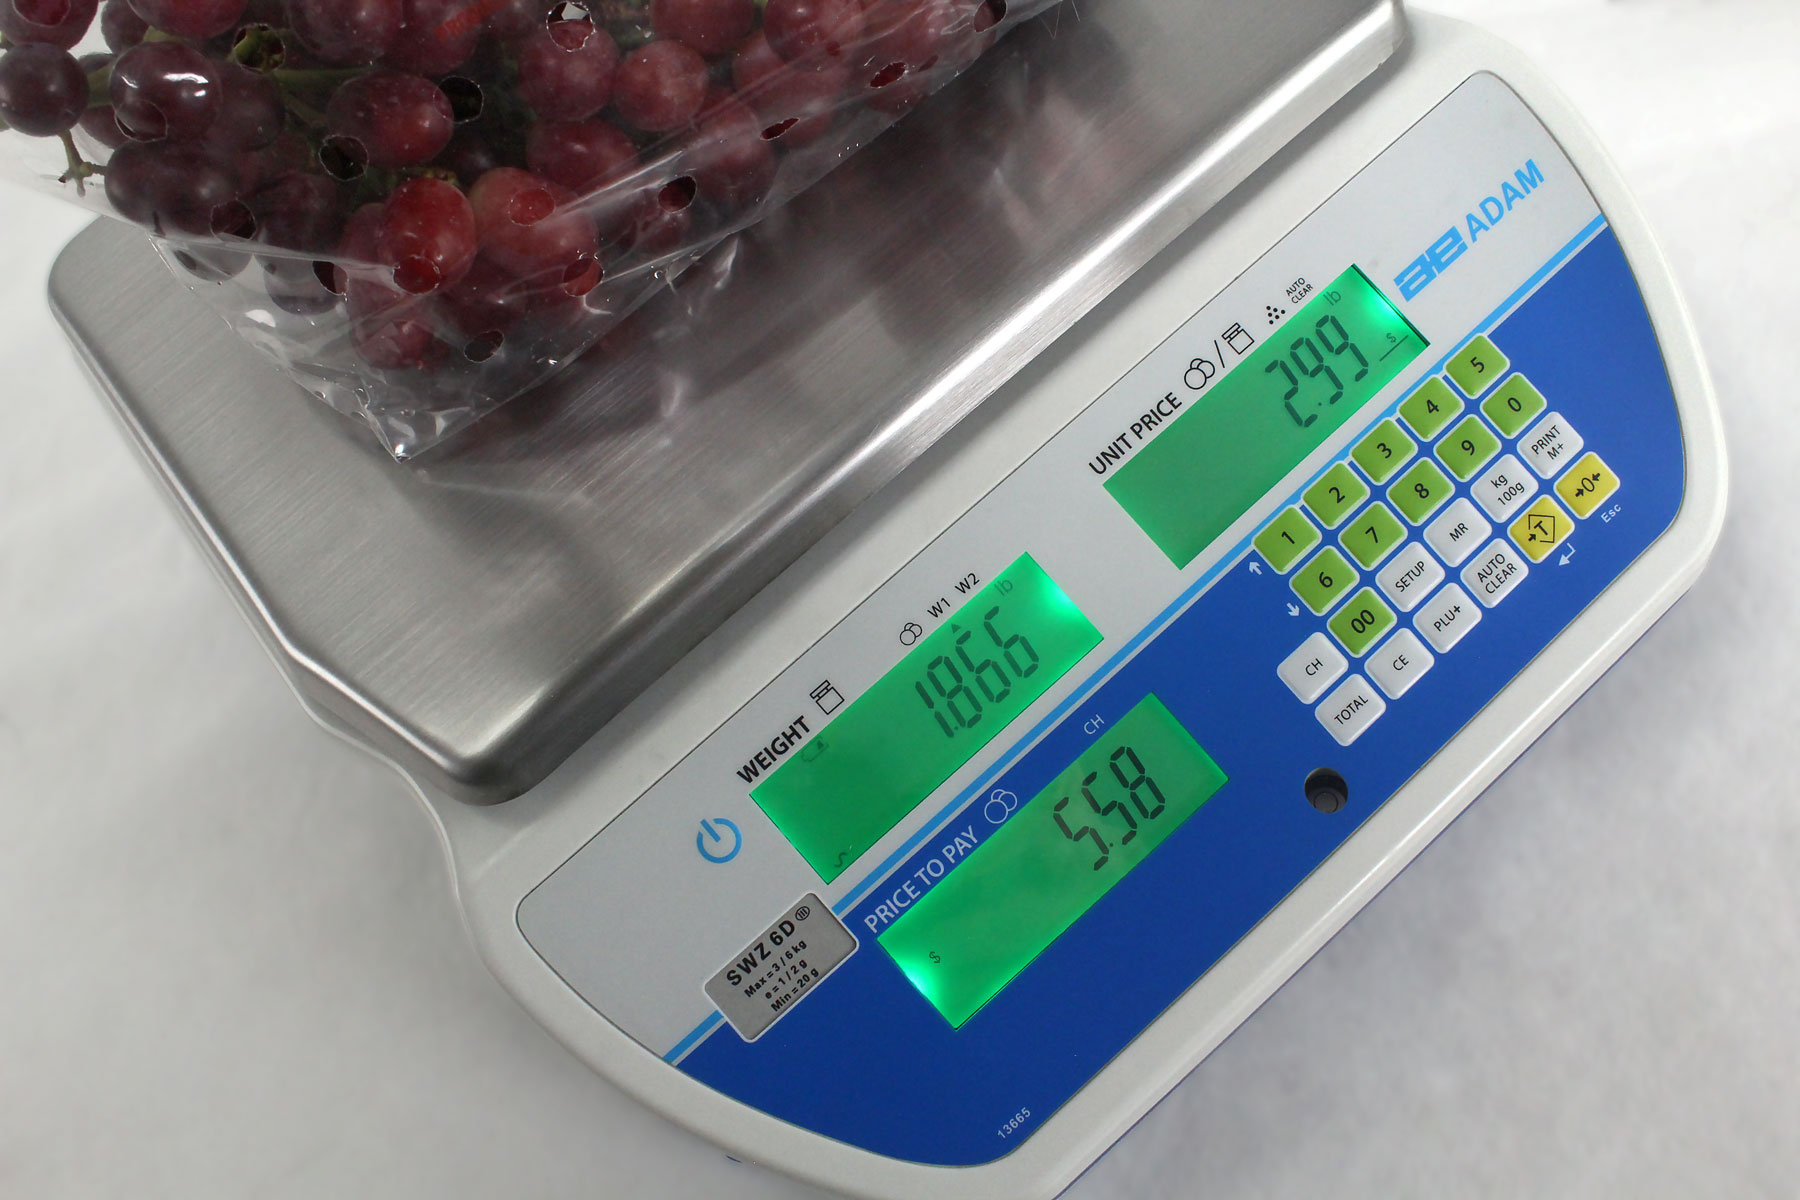 Retail Scale Weighing Fruit